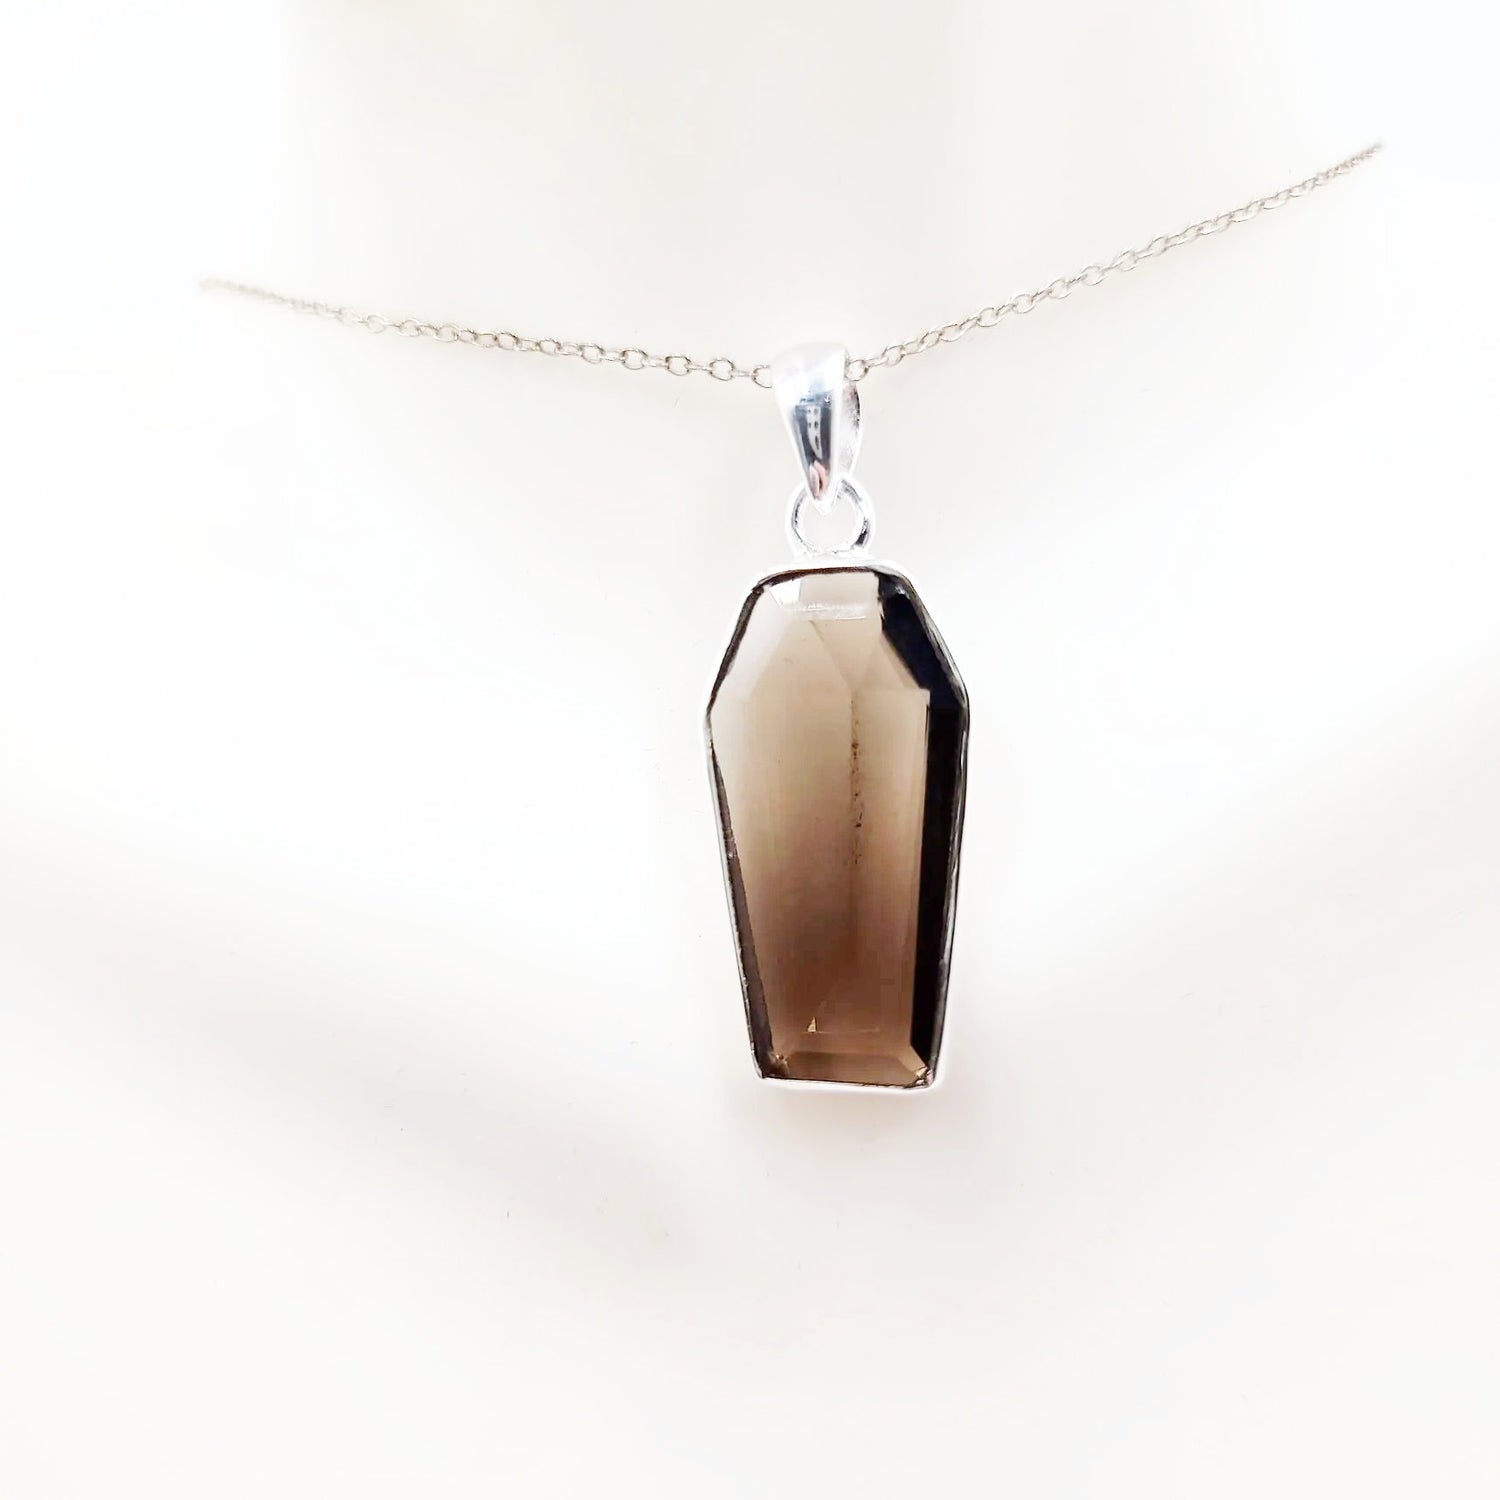 Smoky Quartz Coffin Pendant Sterling Silver Charm - Elevated Metaphysical